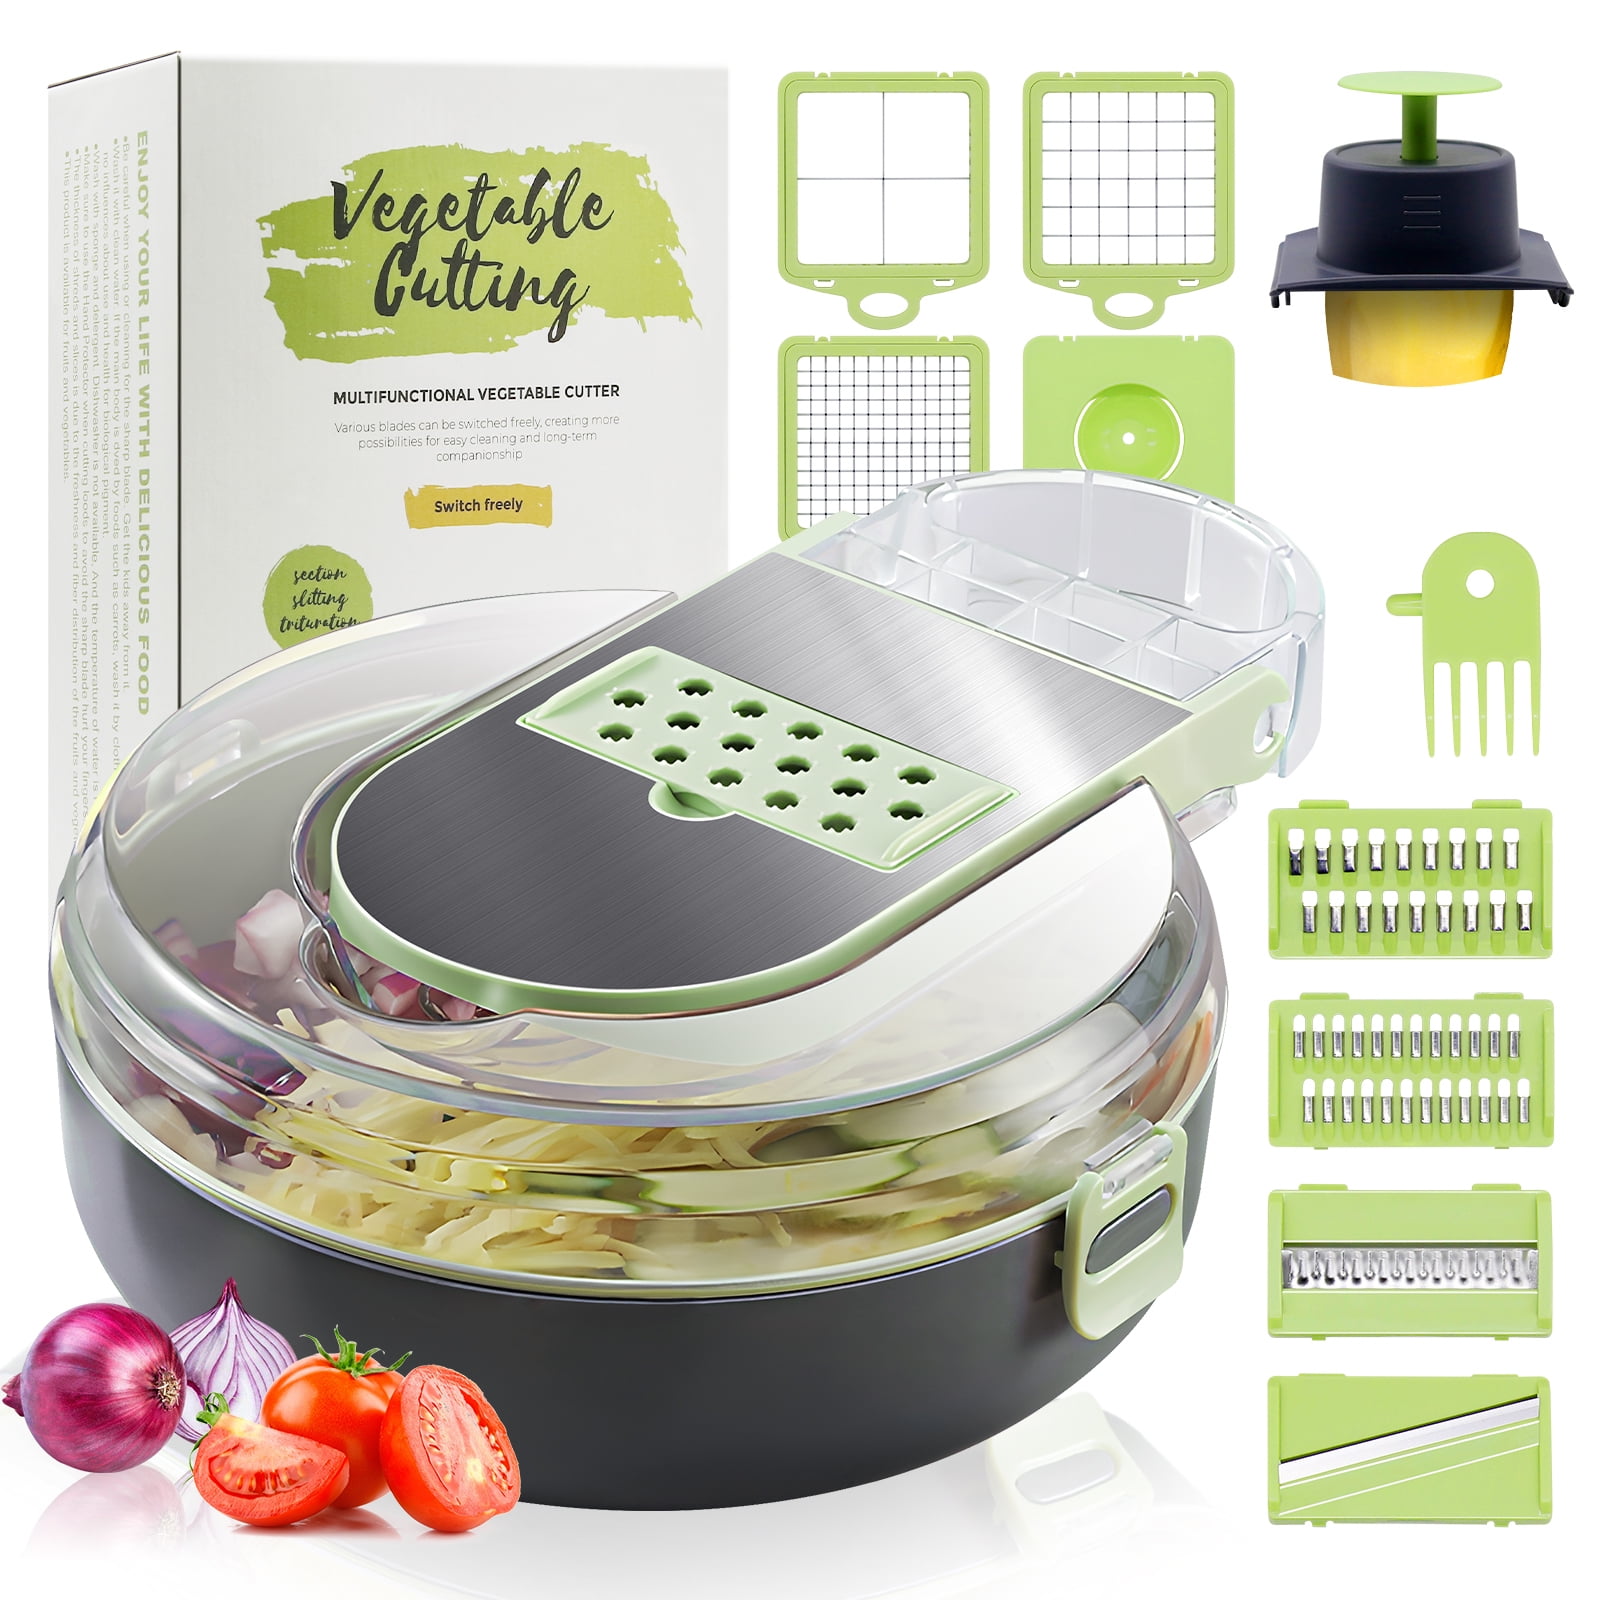 WeiloveYa Vegetable Chopper, Pro Onion Chopper, Multifunctional 13 in 1 Food  Chopper, Kitchen Vegetable Slicer Dicer Cutter,Veggie Chopper With 8  Blades,Carrot and Garlic Chopper With Container 